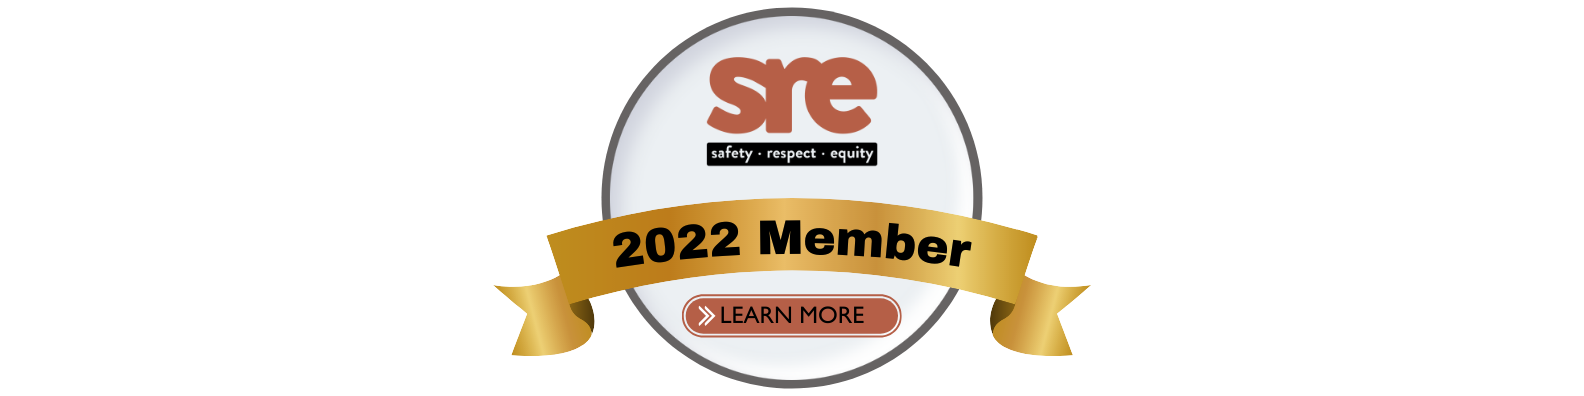 SRE Safety Respect Equity